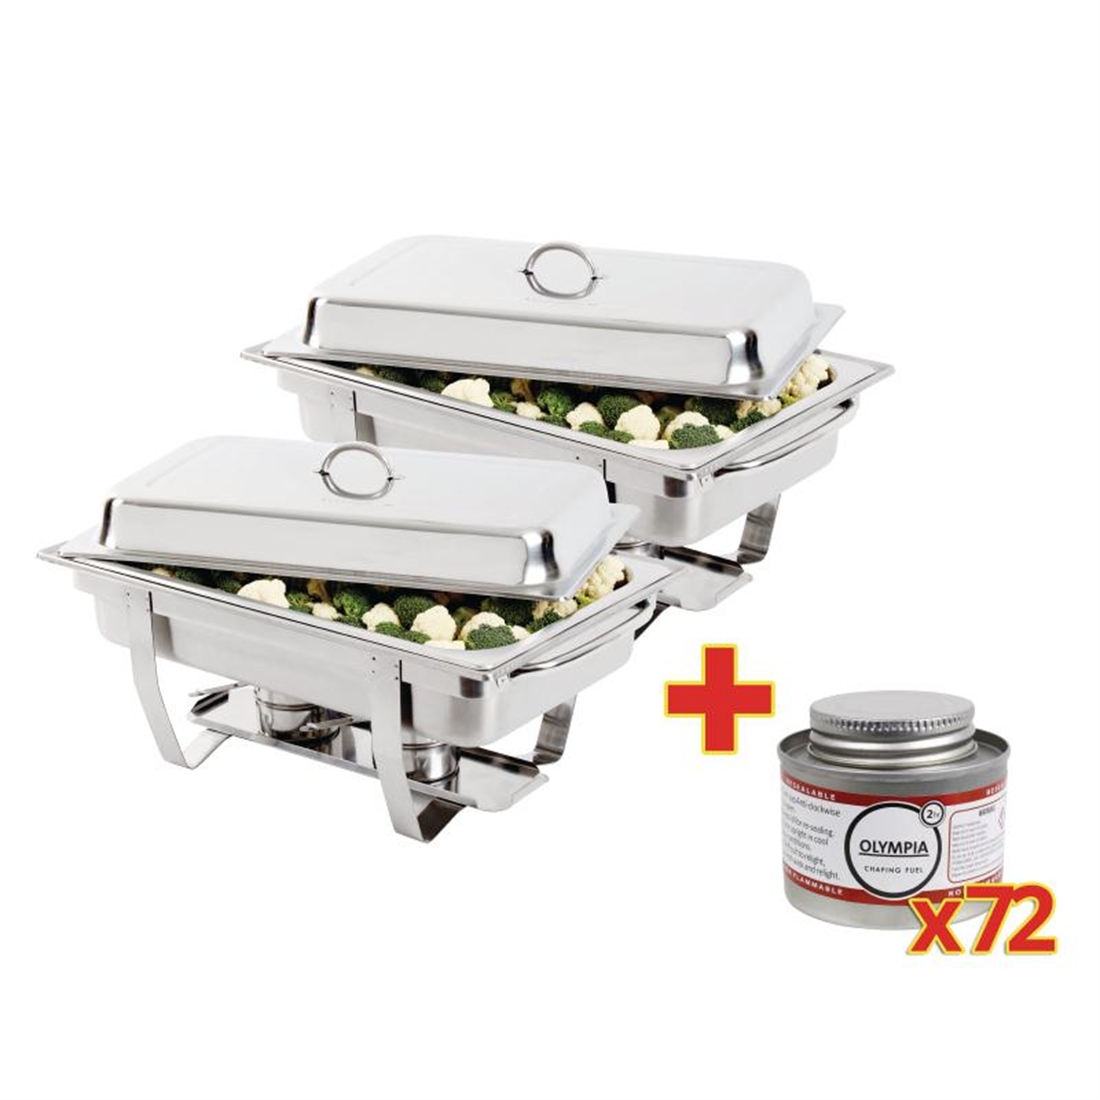 Special Offer 2 Milan Chafers and 72 Olympia Liquid Fuel Tins